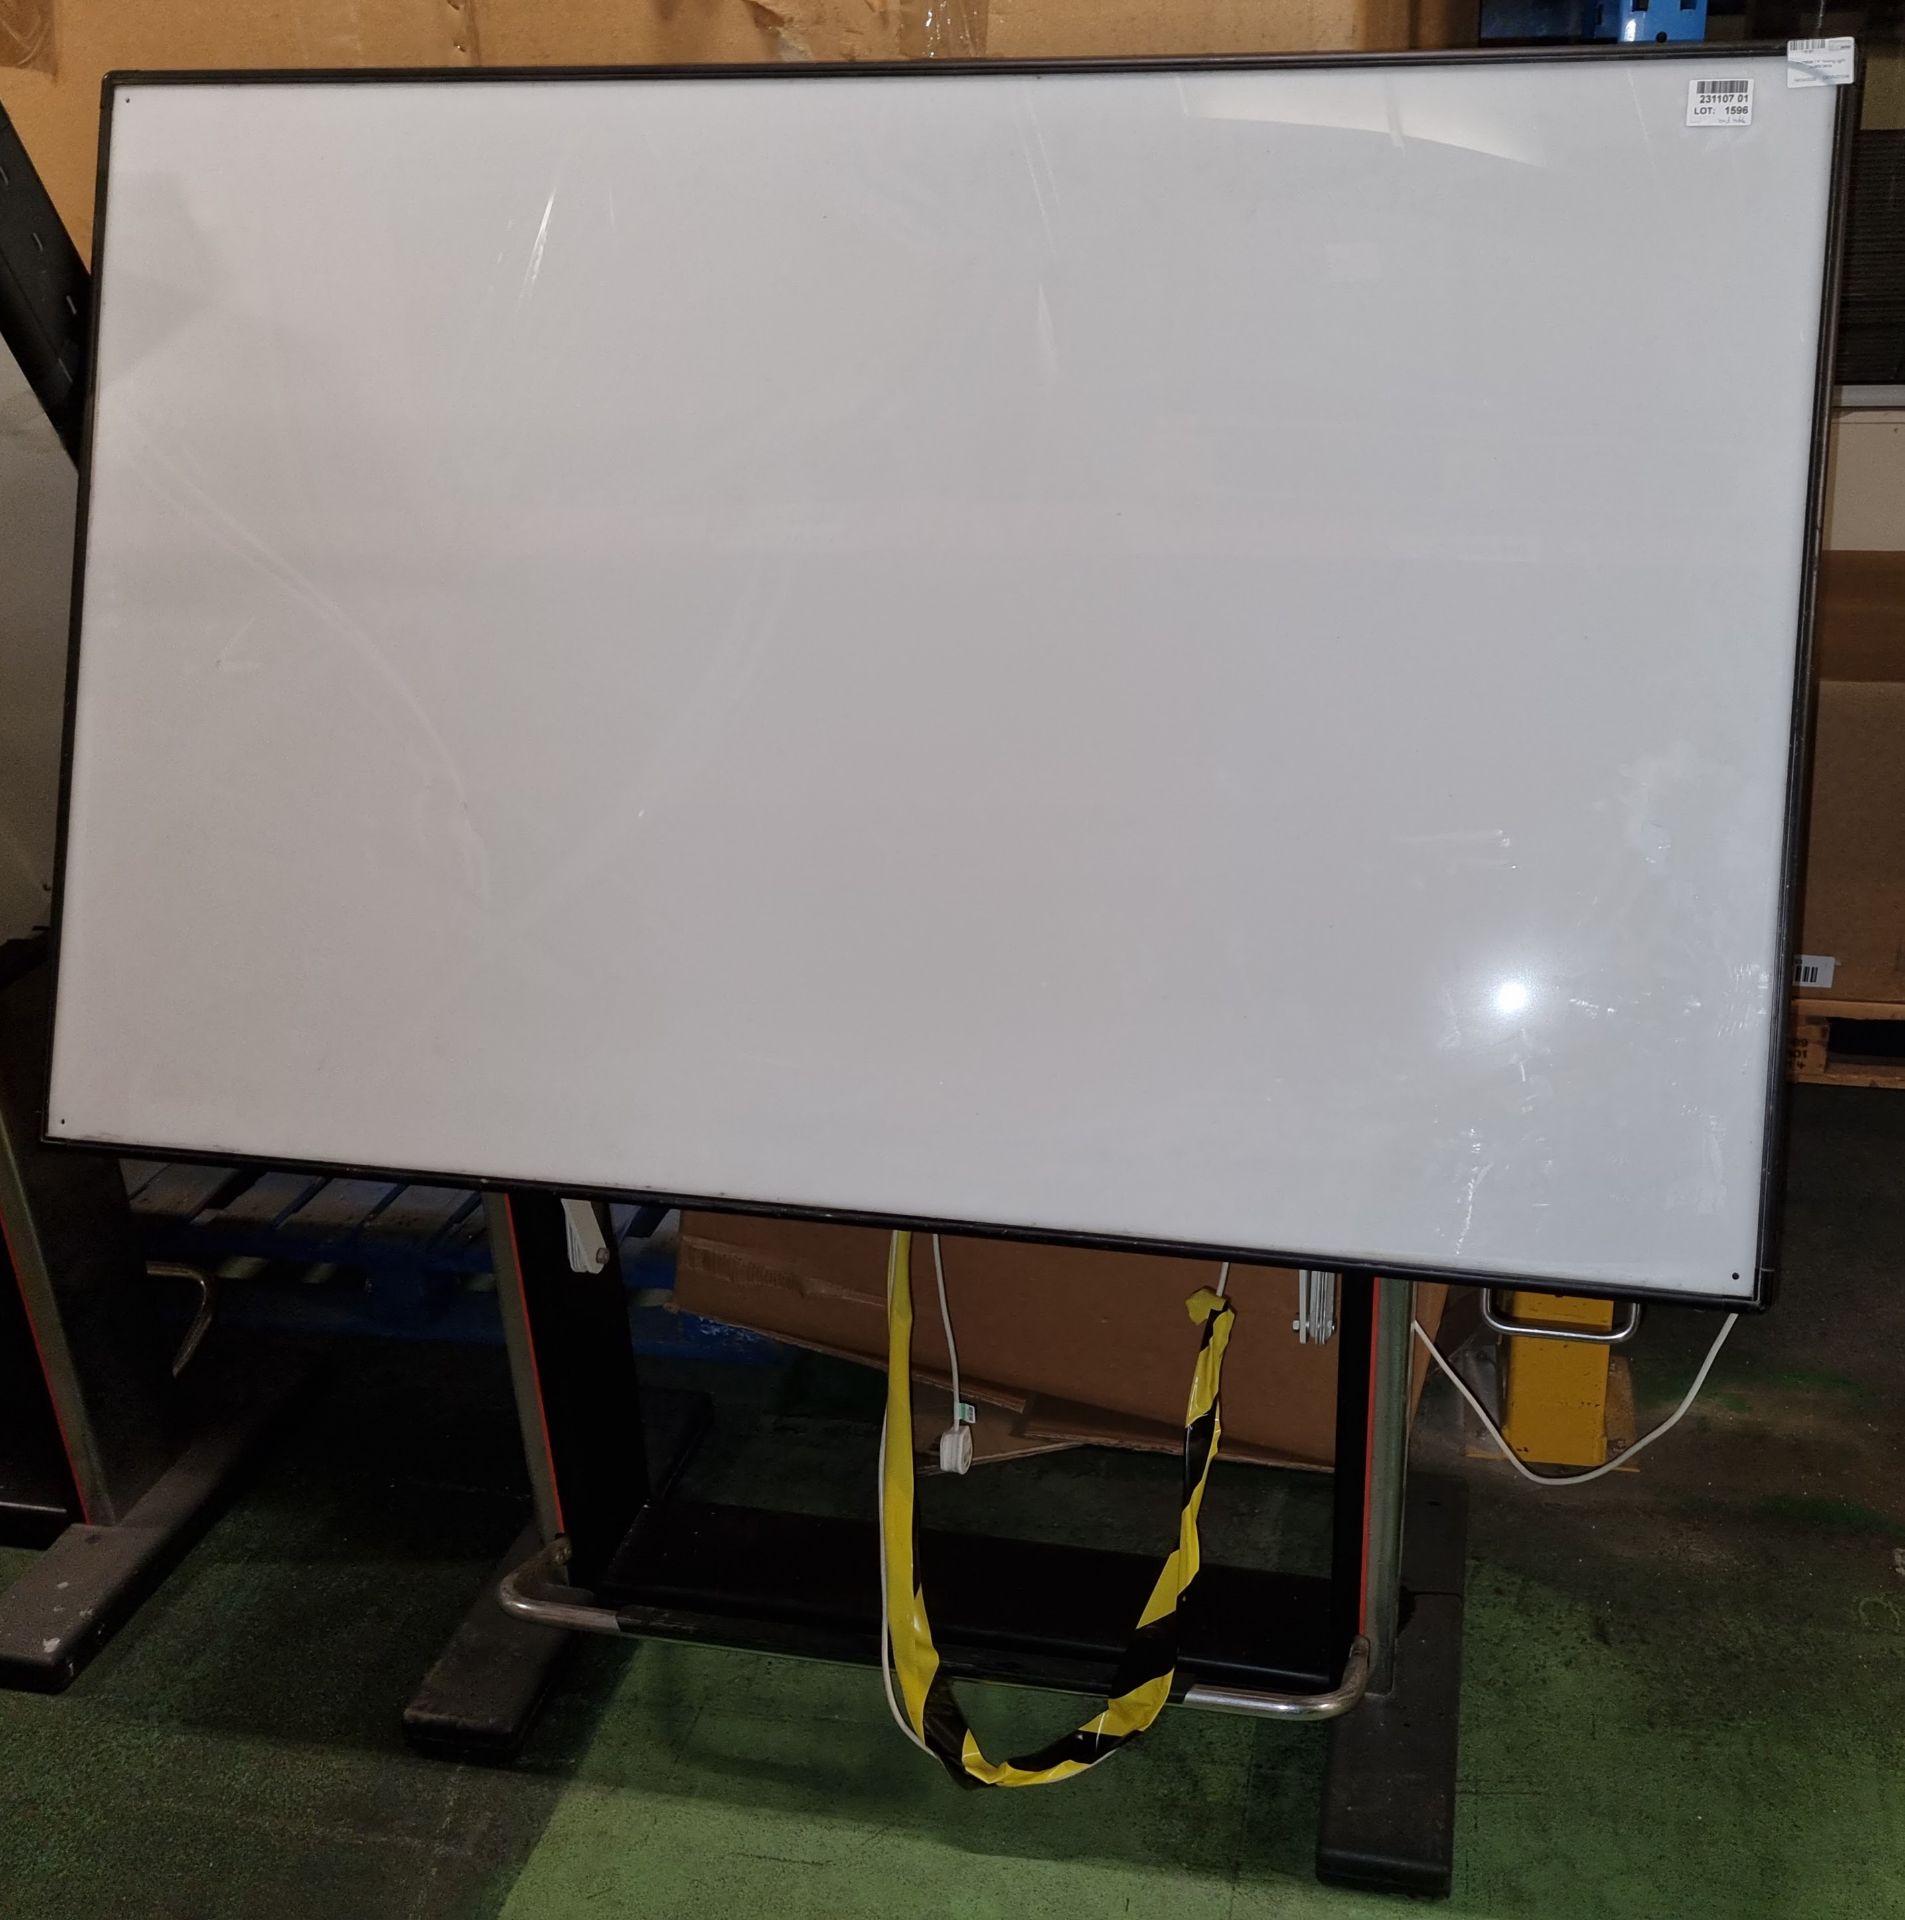 Portable 74 inch folding light board table - 1610mm long - COLLECTION ONLY DUE TO SIZE